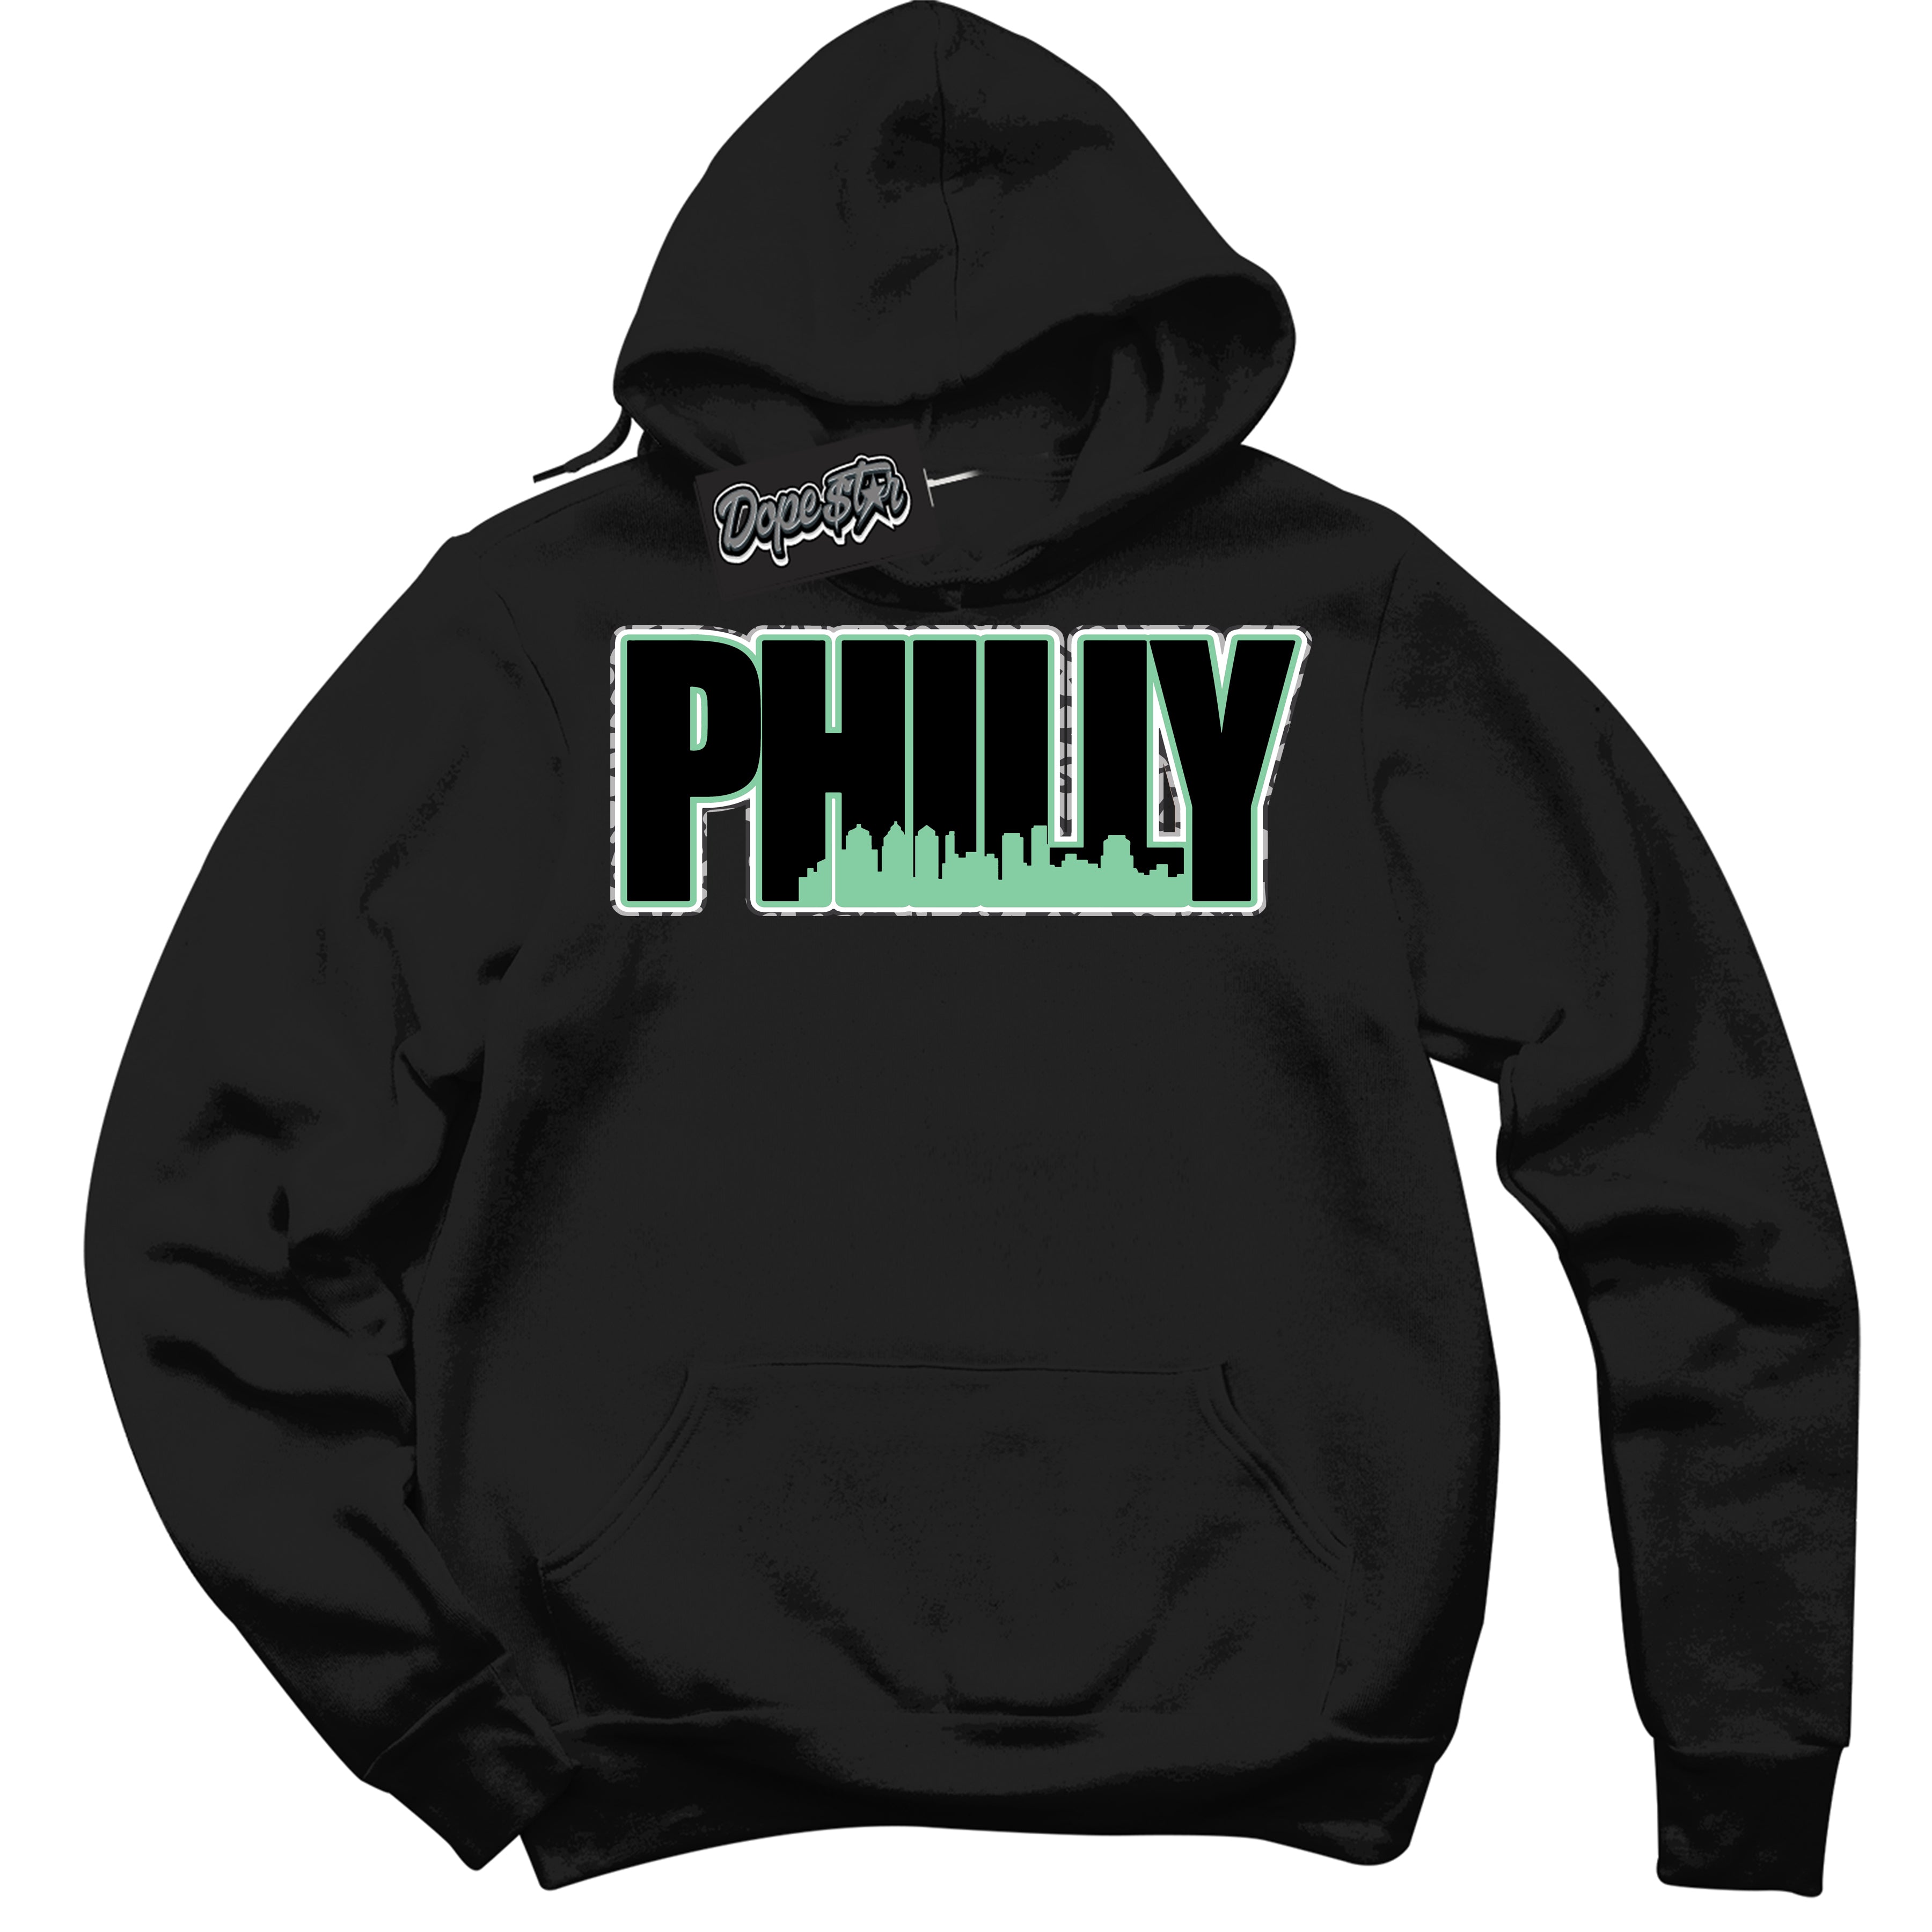 Cool Black Graphic DopeStar Hoodie with “ Philly “ print, that perfectly matches Green Glow 3S sneakers